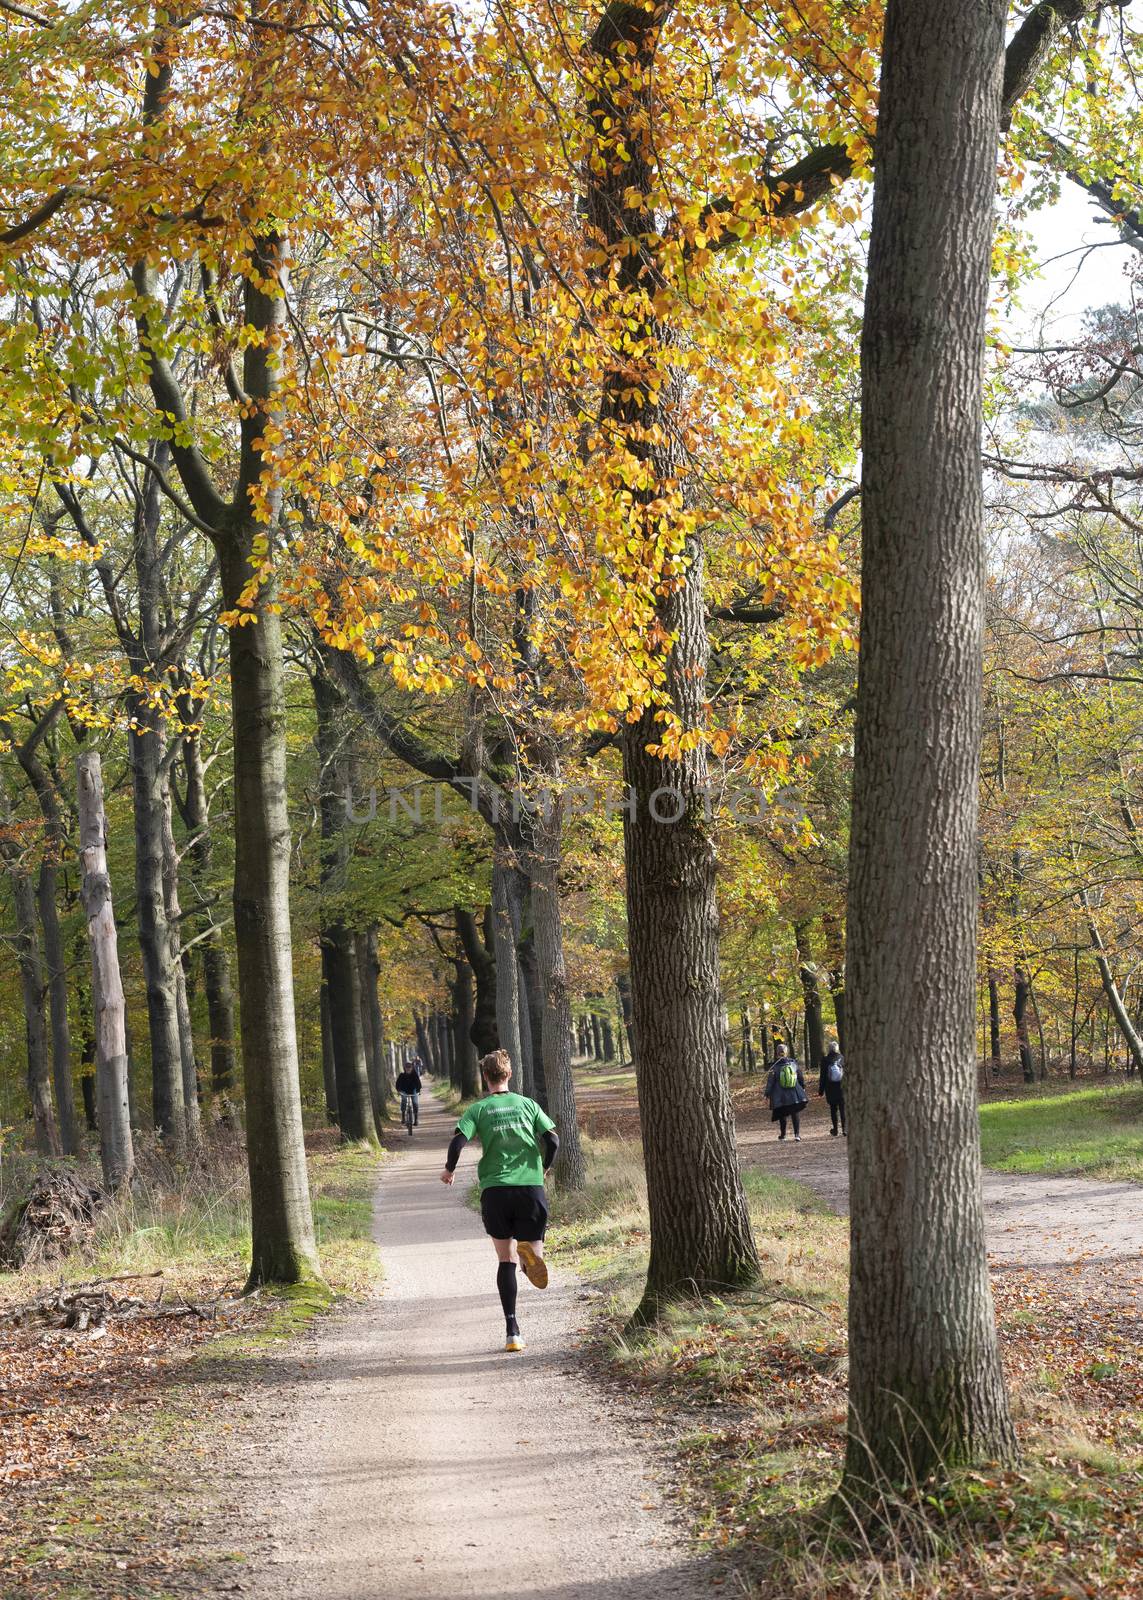 people run, ride bicycle and walk in autumn forest near zeist in the netherlands